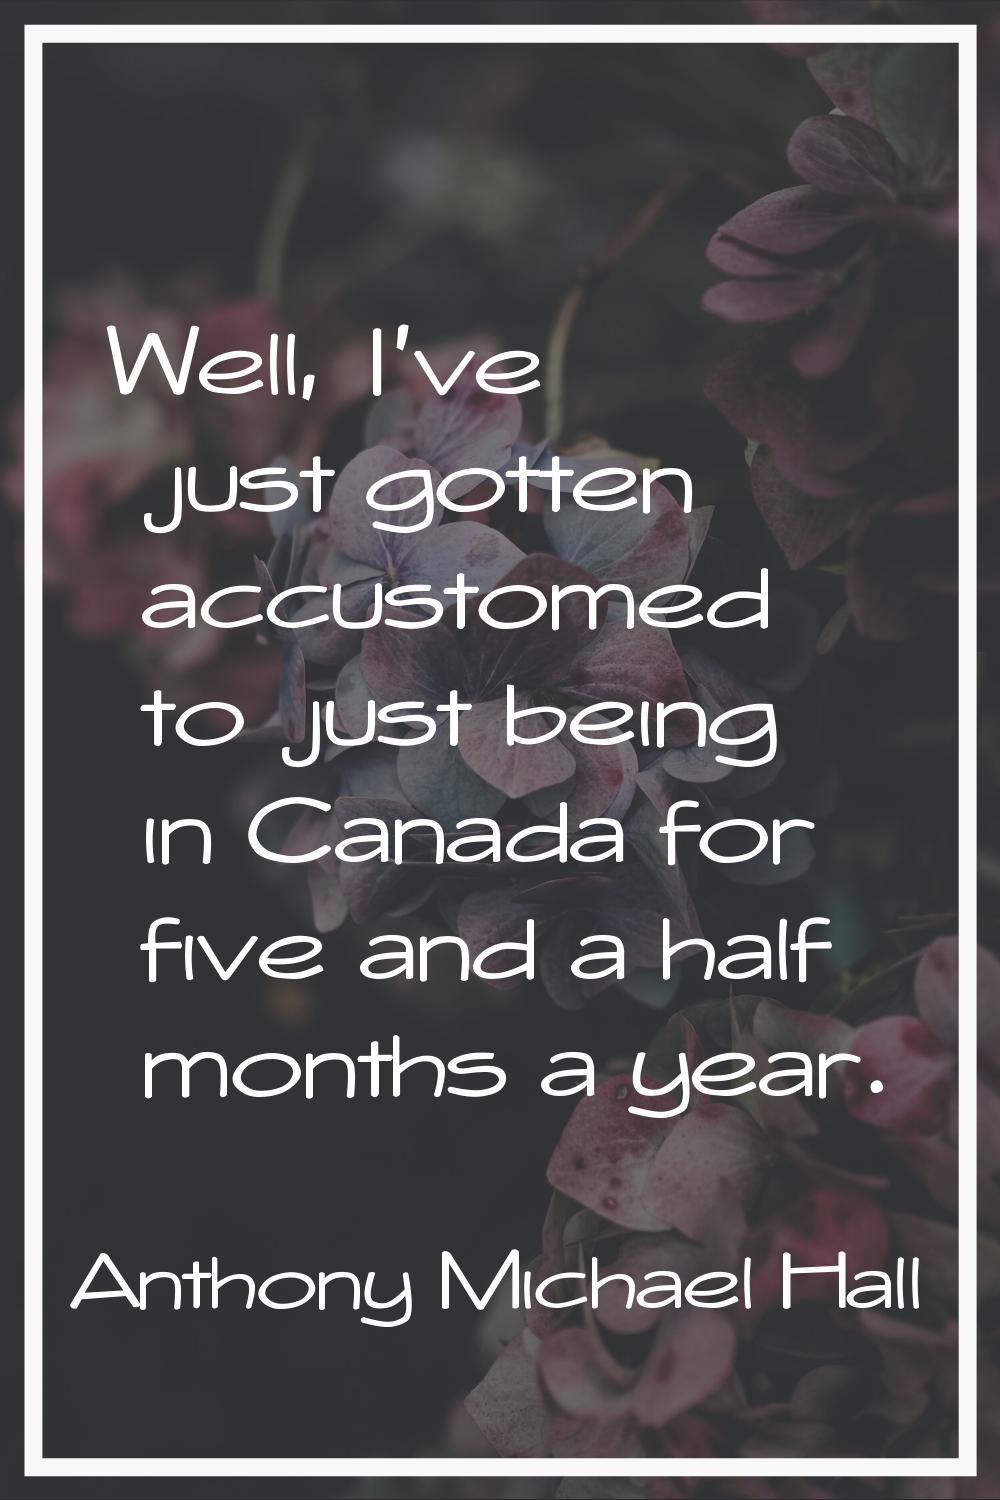 Well, I've just gotten accustomed to just being in Canada for five and a half months a year.